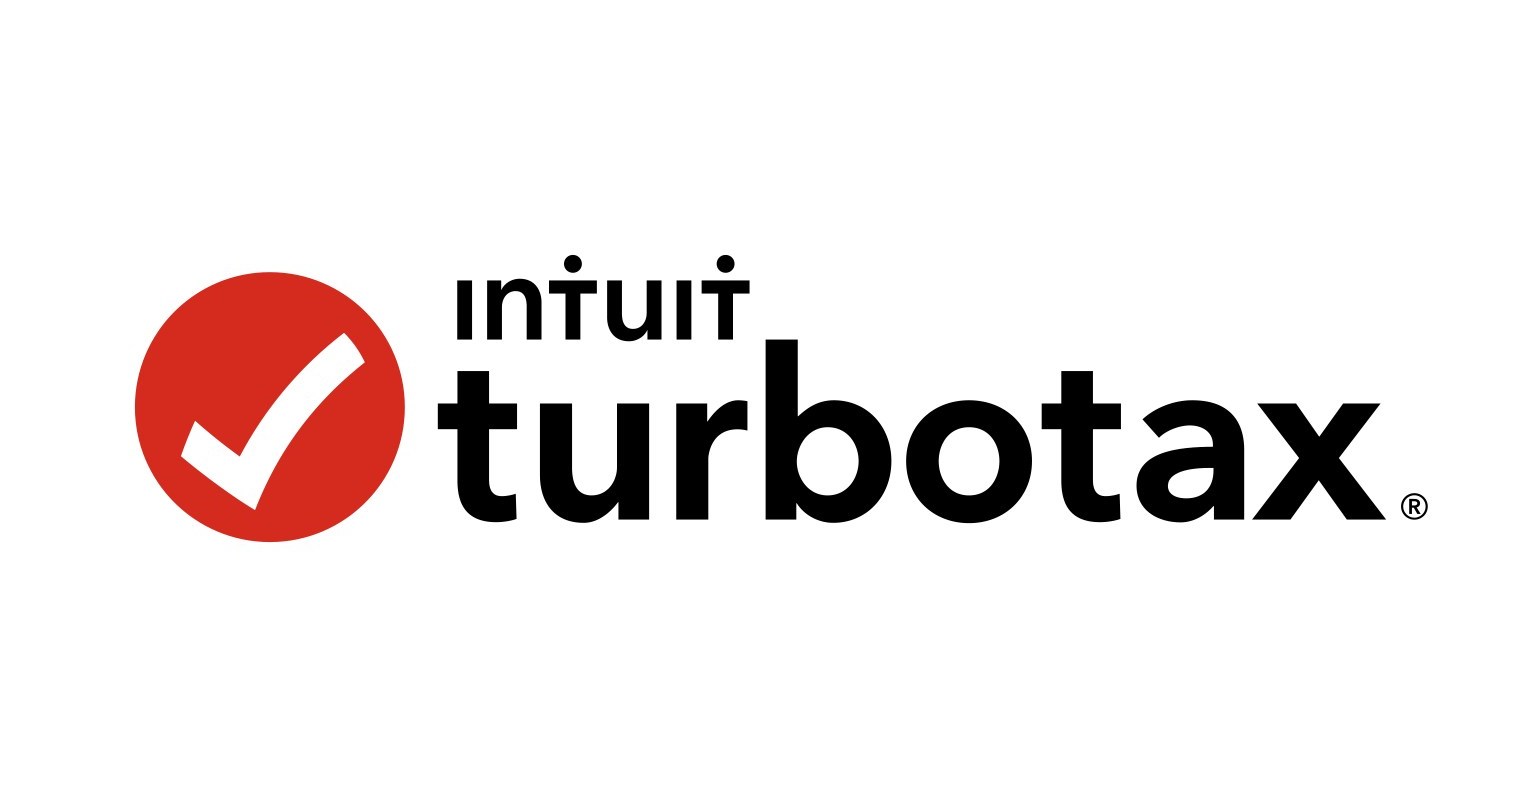 Intuit TurboTax, Makers of Canada's 1 Tax Software, Transforms